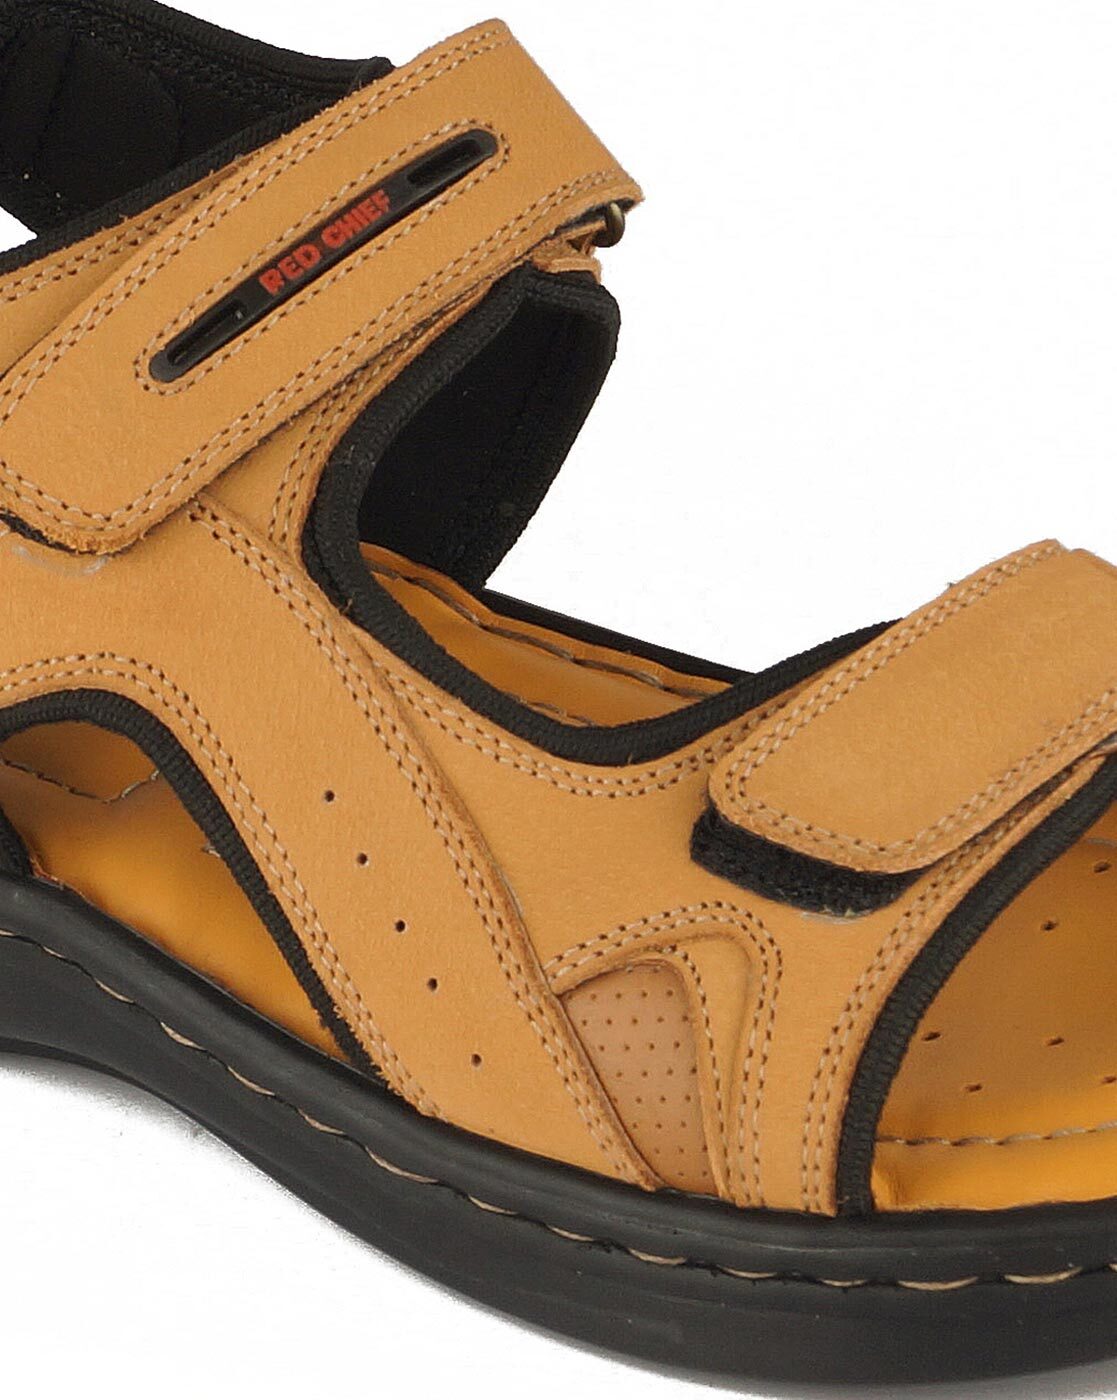 SamTopShoes RED CHIEF SANDAL Casuals For Men - Buy SamTopShoes RED CHIEF  SANDAL Casuals For Men Online at Best Price - Shop Online for Footwears in  India | Flipkart.com